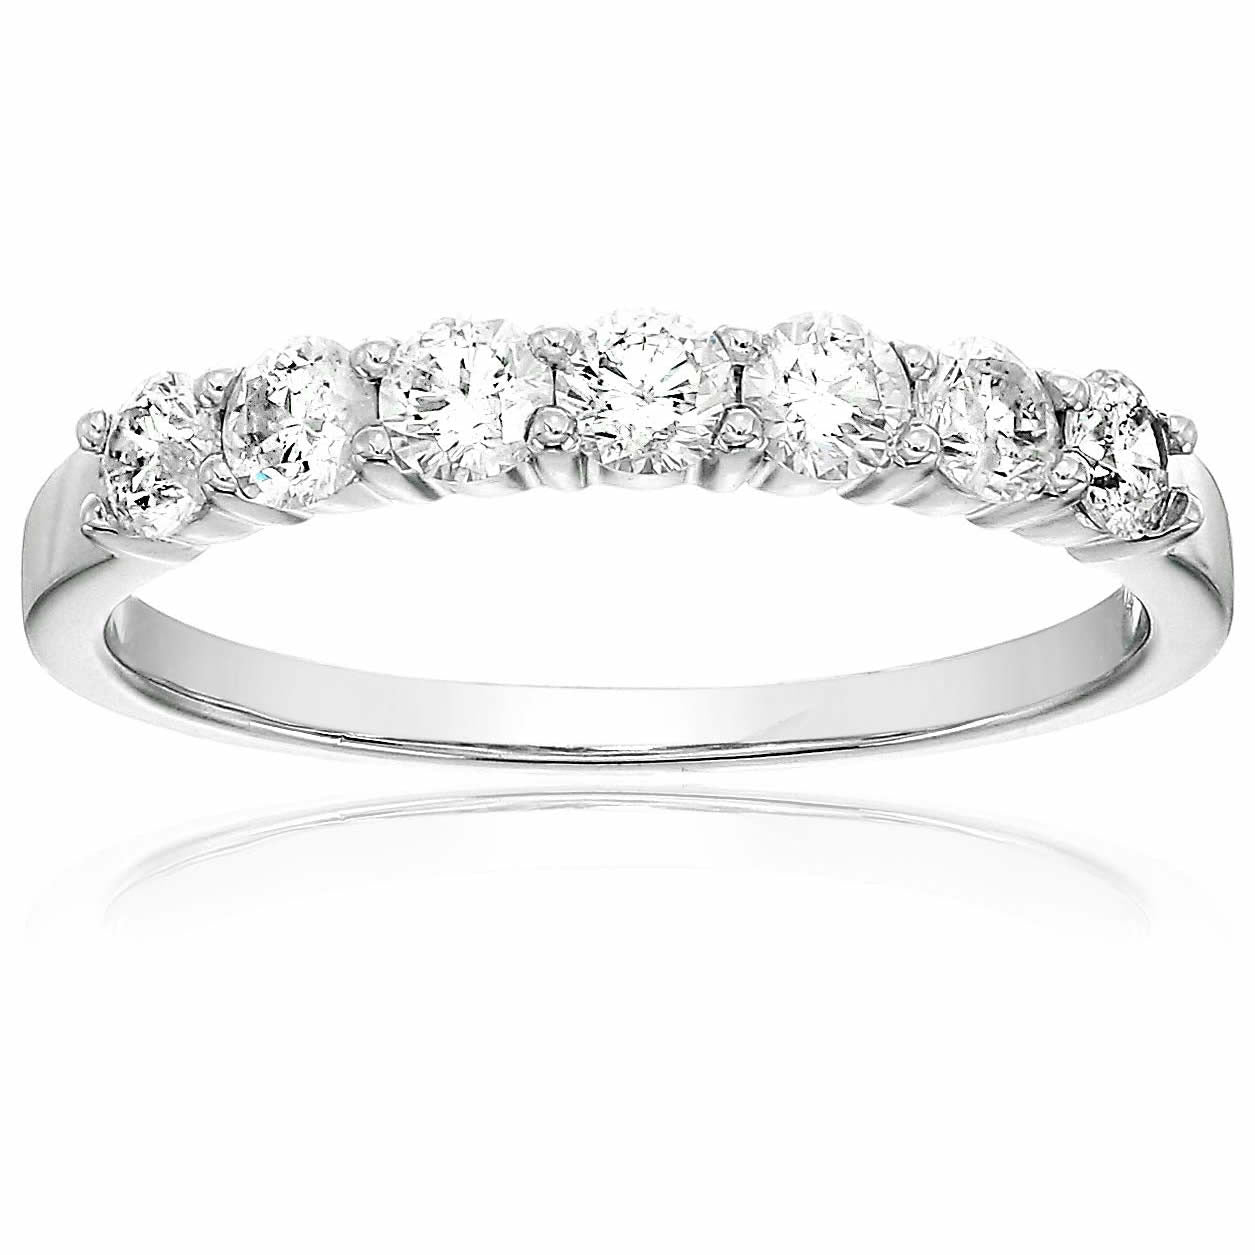 1/2 cttw Round Diamond Wedding Band for Women in 14K White Gold Prong Set, Size 4-10